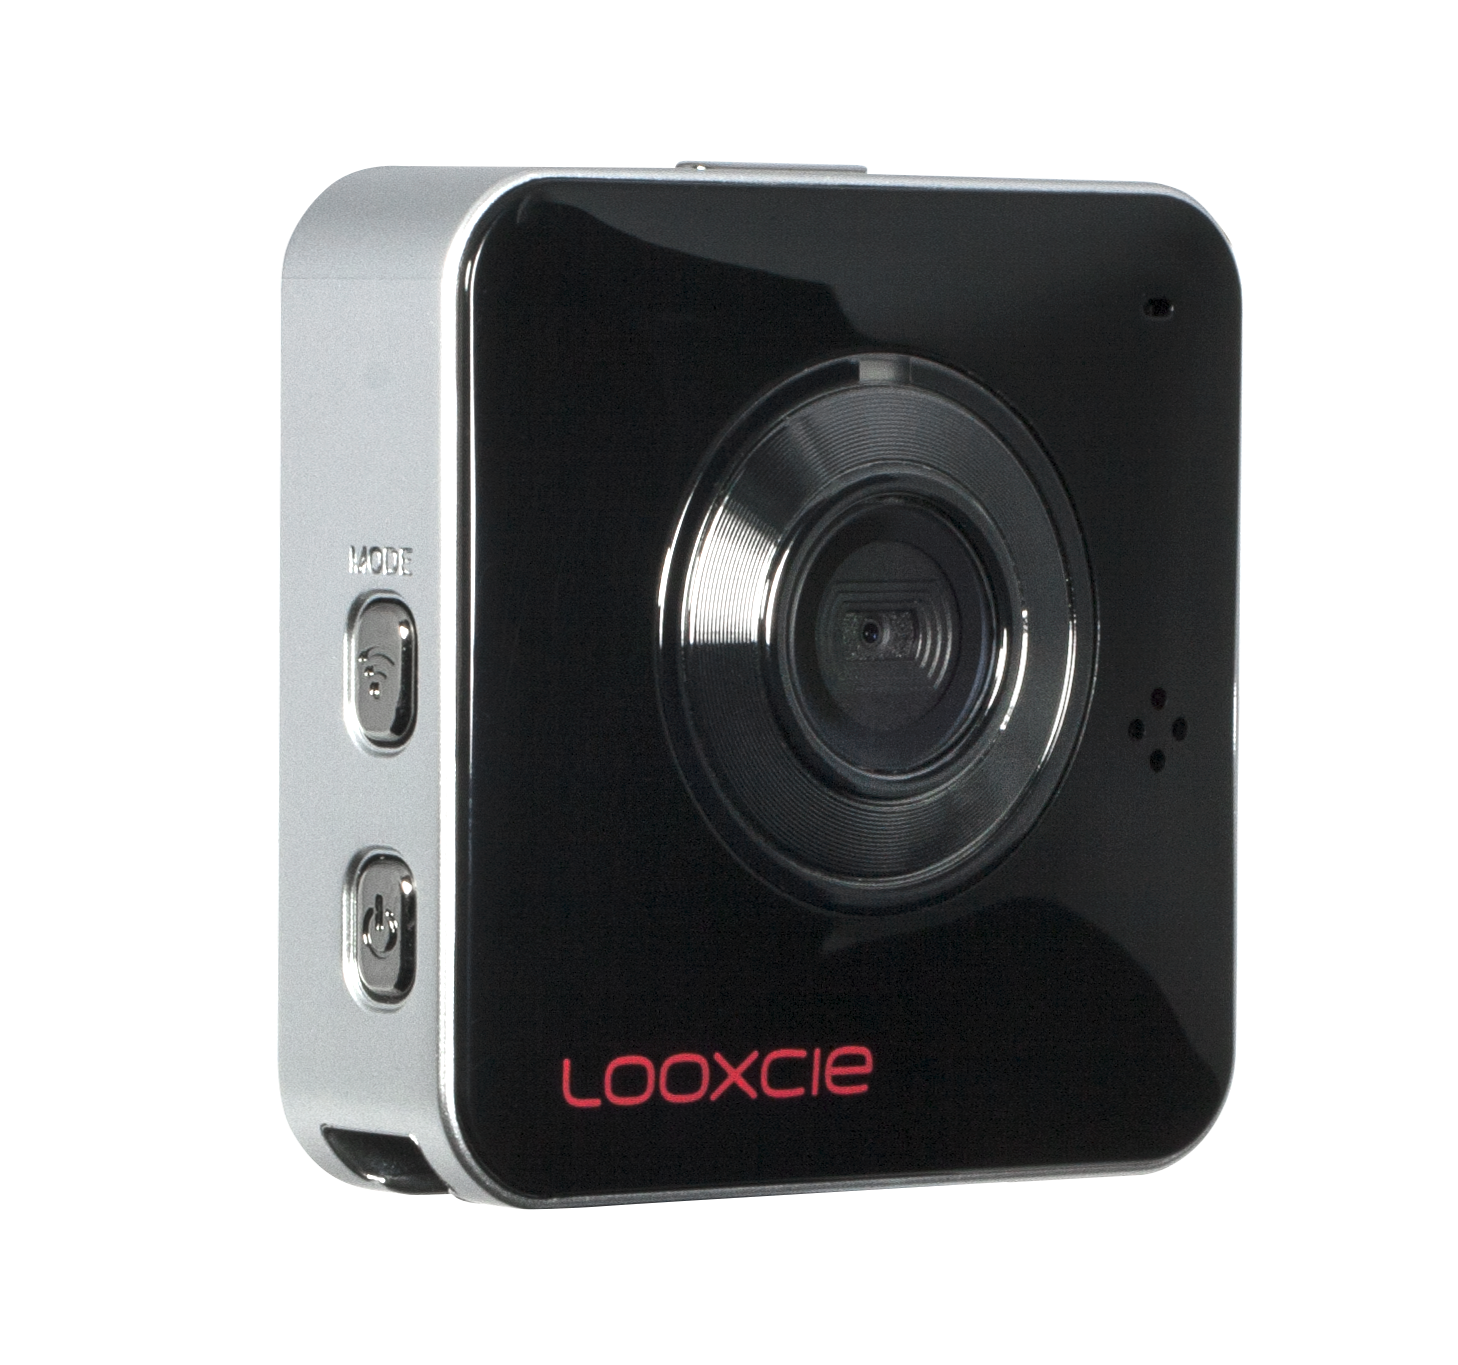 Looxcie 3 Camera (right angle) - CLEAR Background